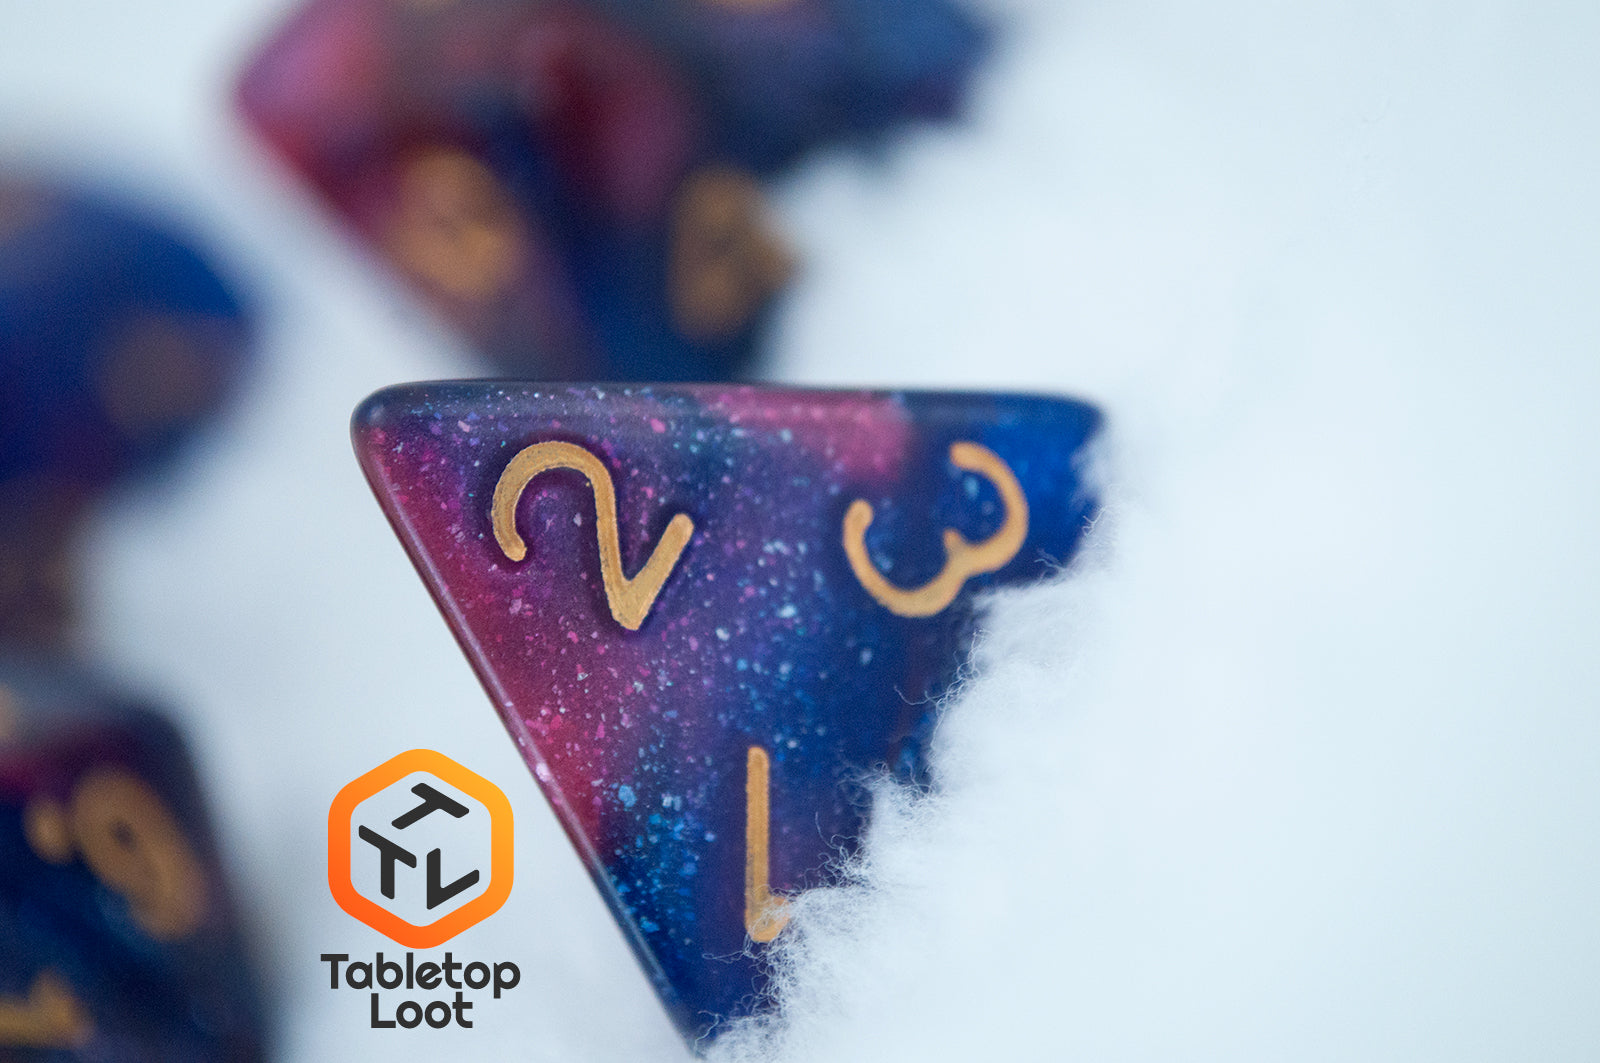 A close up of the D4 from the Rose Galaxy 7 piece dice set from Tabletop Loot with swirls of glittery pink, purple, and blue throughout with gold numbering.